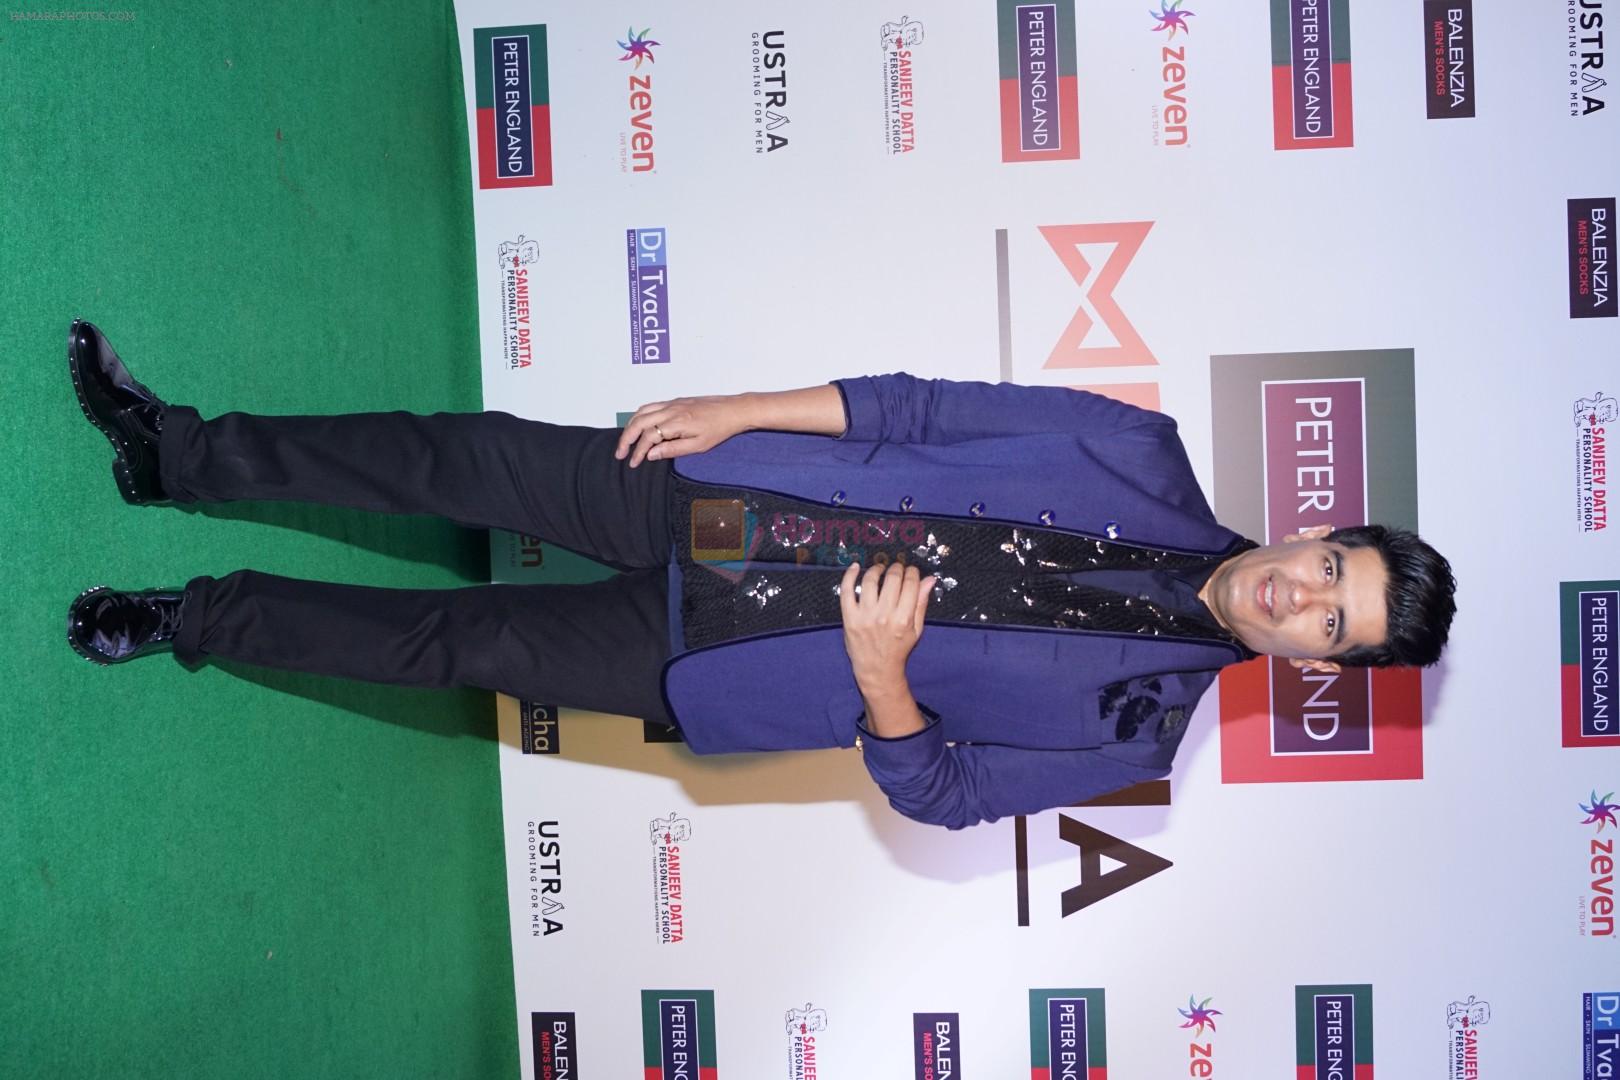 Manish Malhotra at the Red Carpet Of Peter England Mr. India Finale on 14th Dec 2017